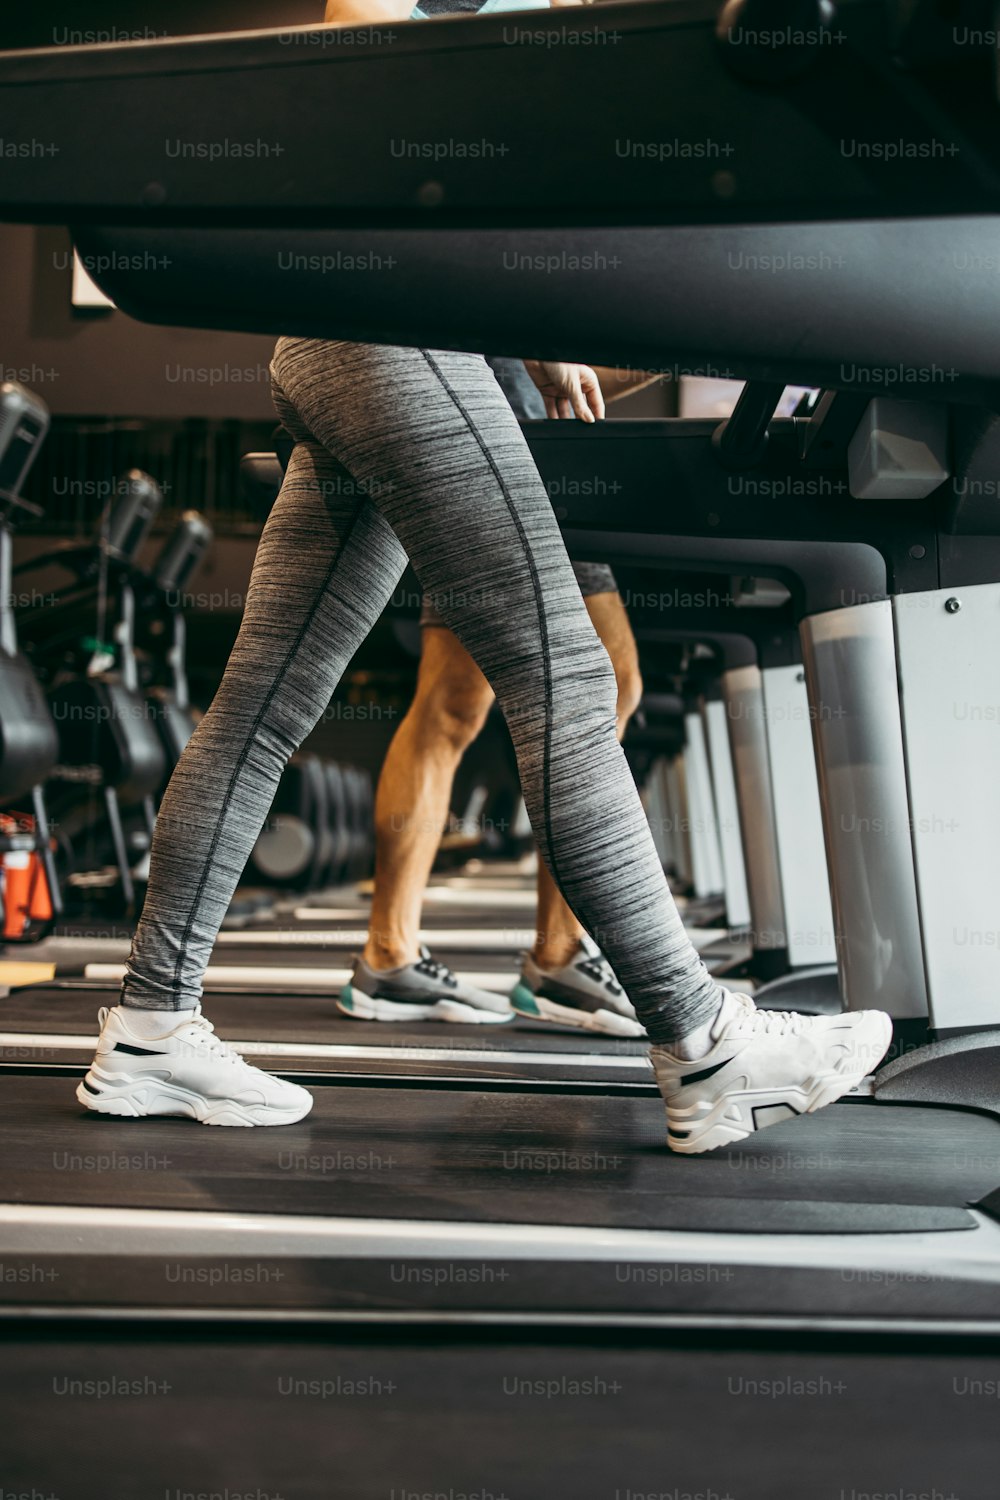 Young fit woman and man running on treadmill in modern fitness gym